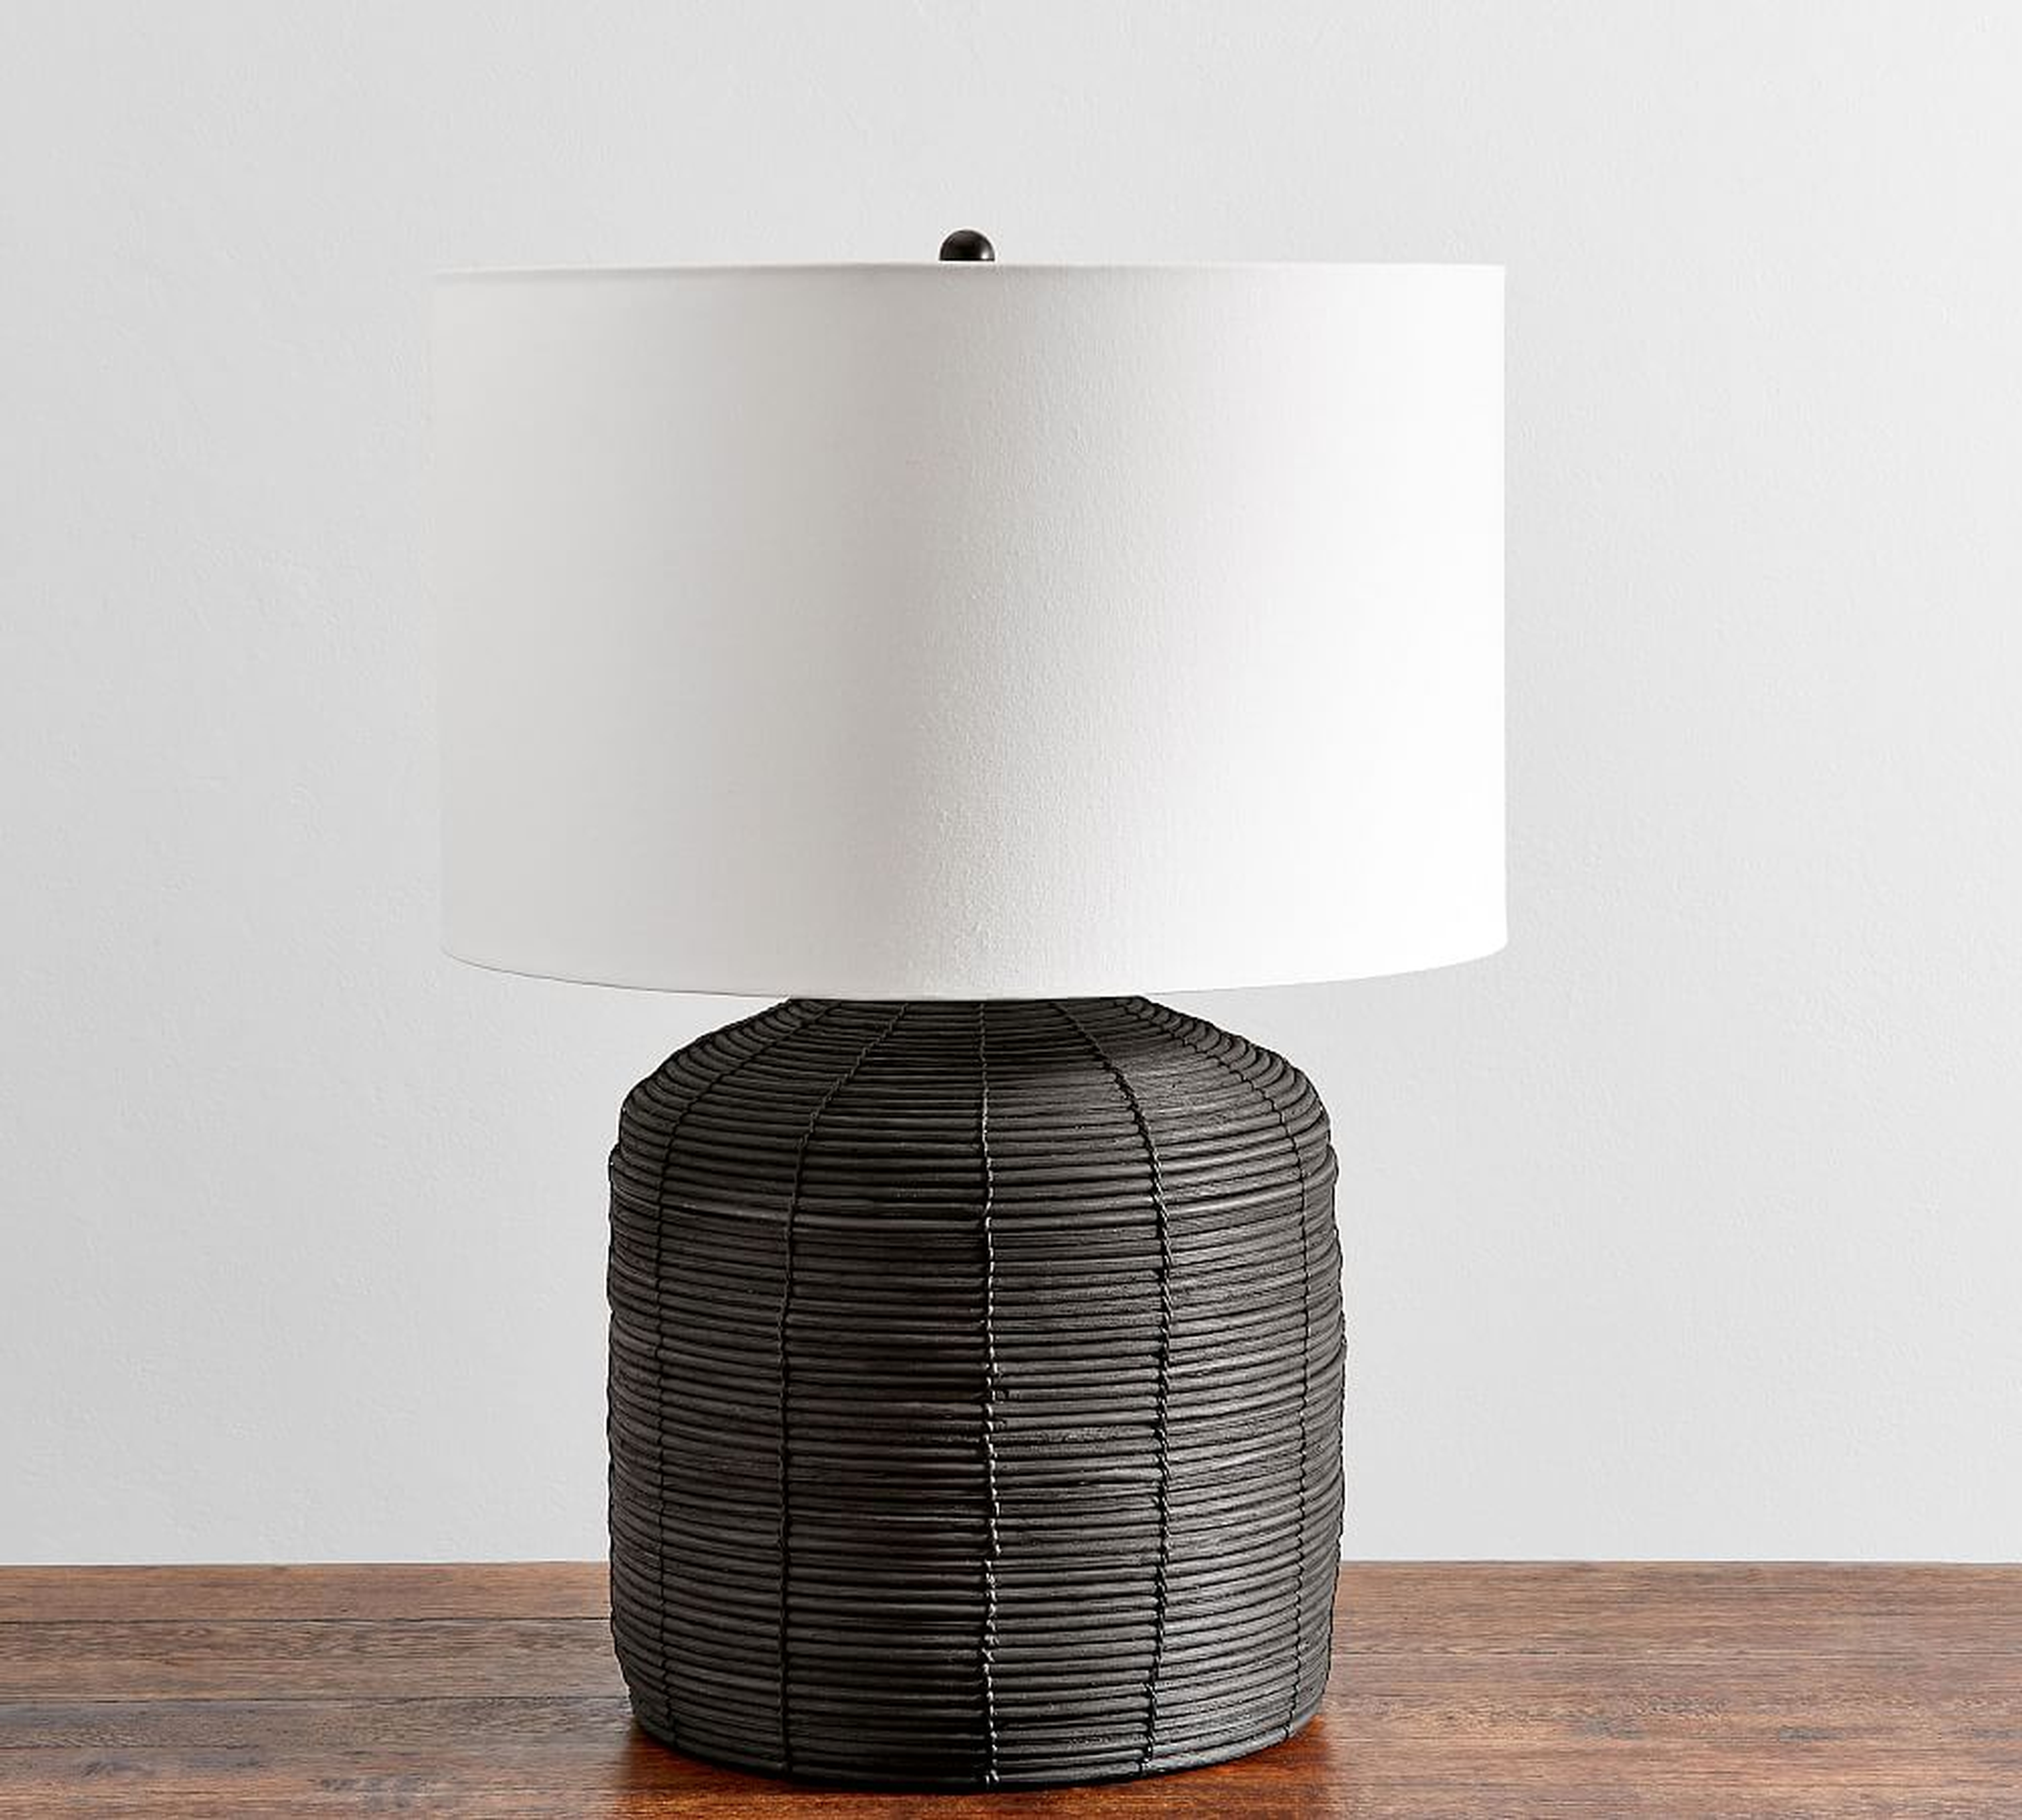 Cambria Seagrass Table Lamp with Small SS Gallery Shade, Black, Small - Pottery Barn